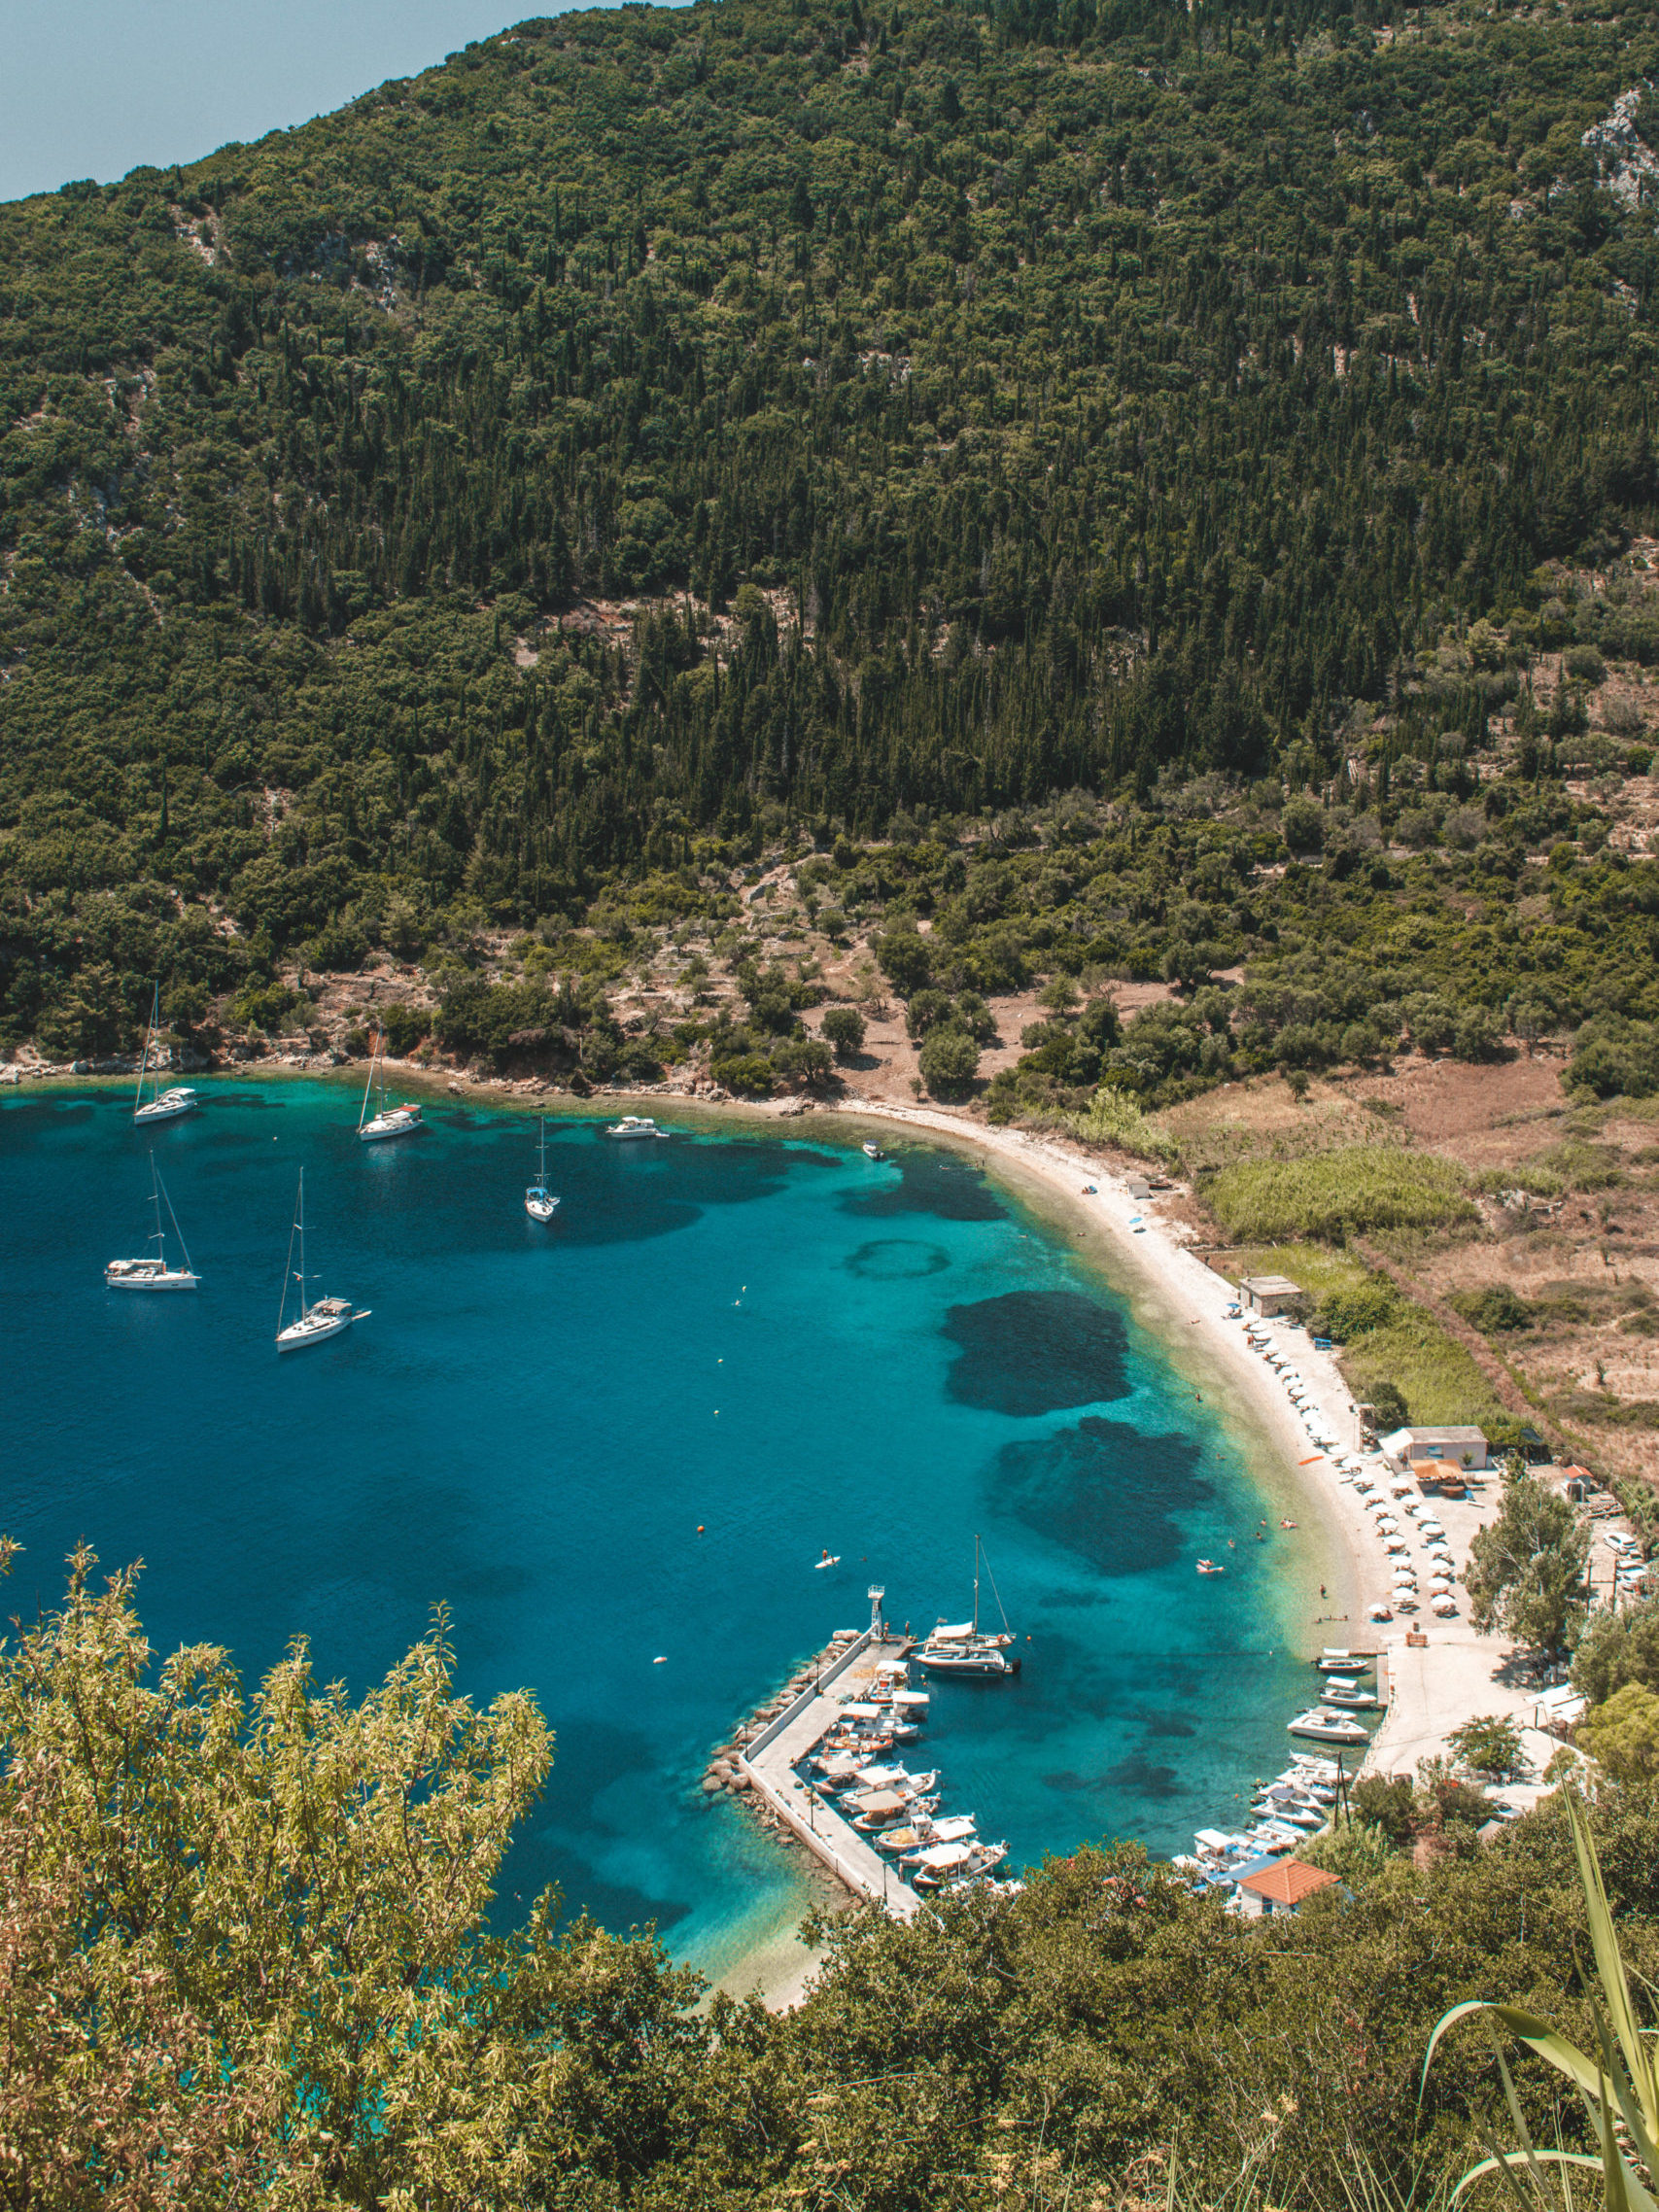 Ionian Islands travel guide